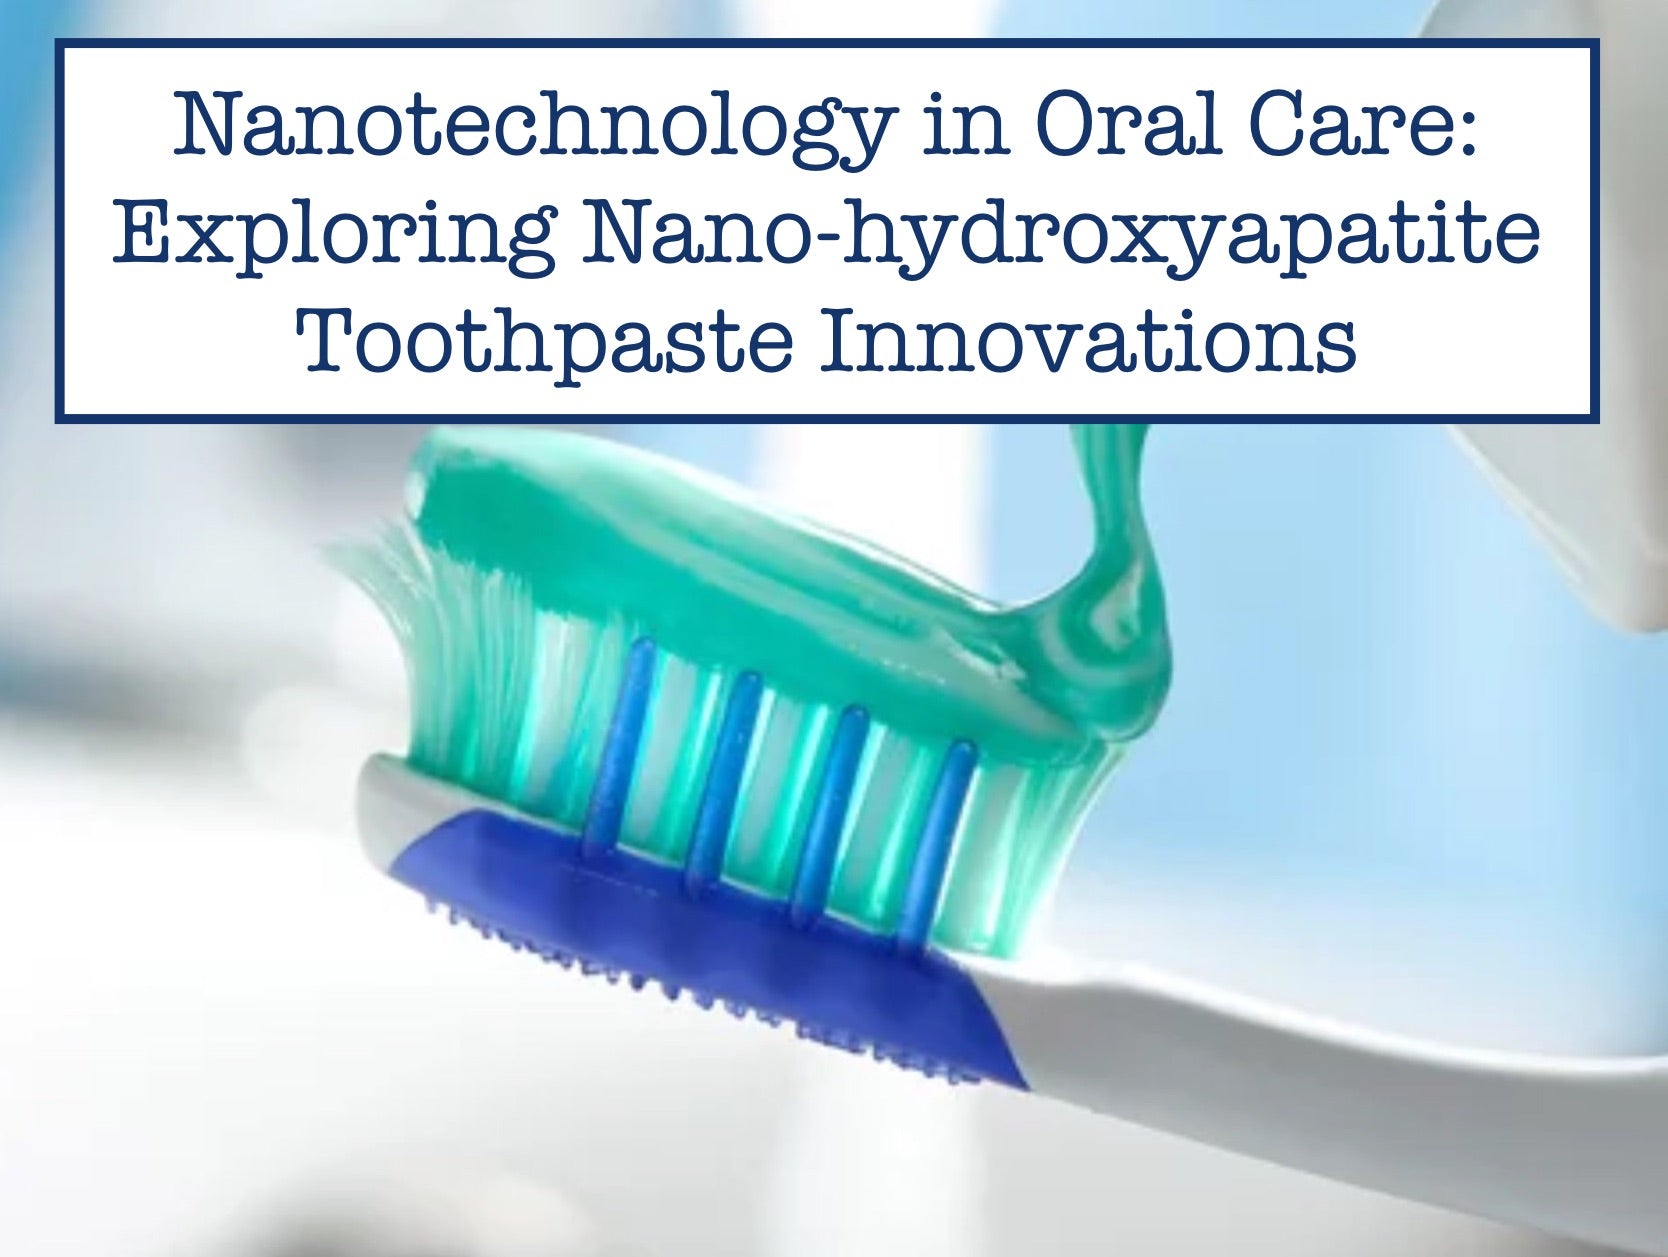 Nanotechnology in Oral Care: Exploring Nano-hydroxyapatite Toothpaste Innovations